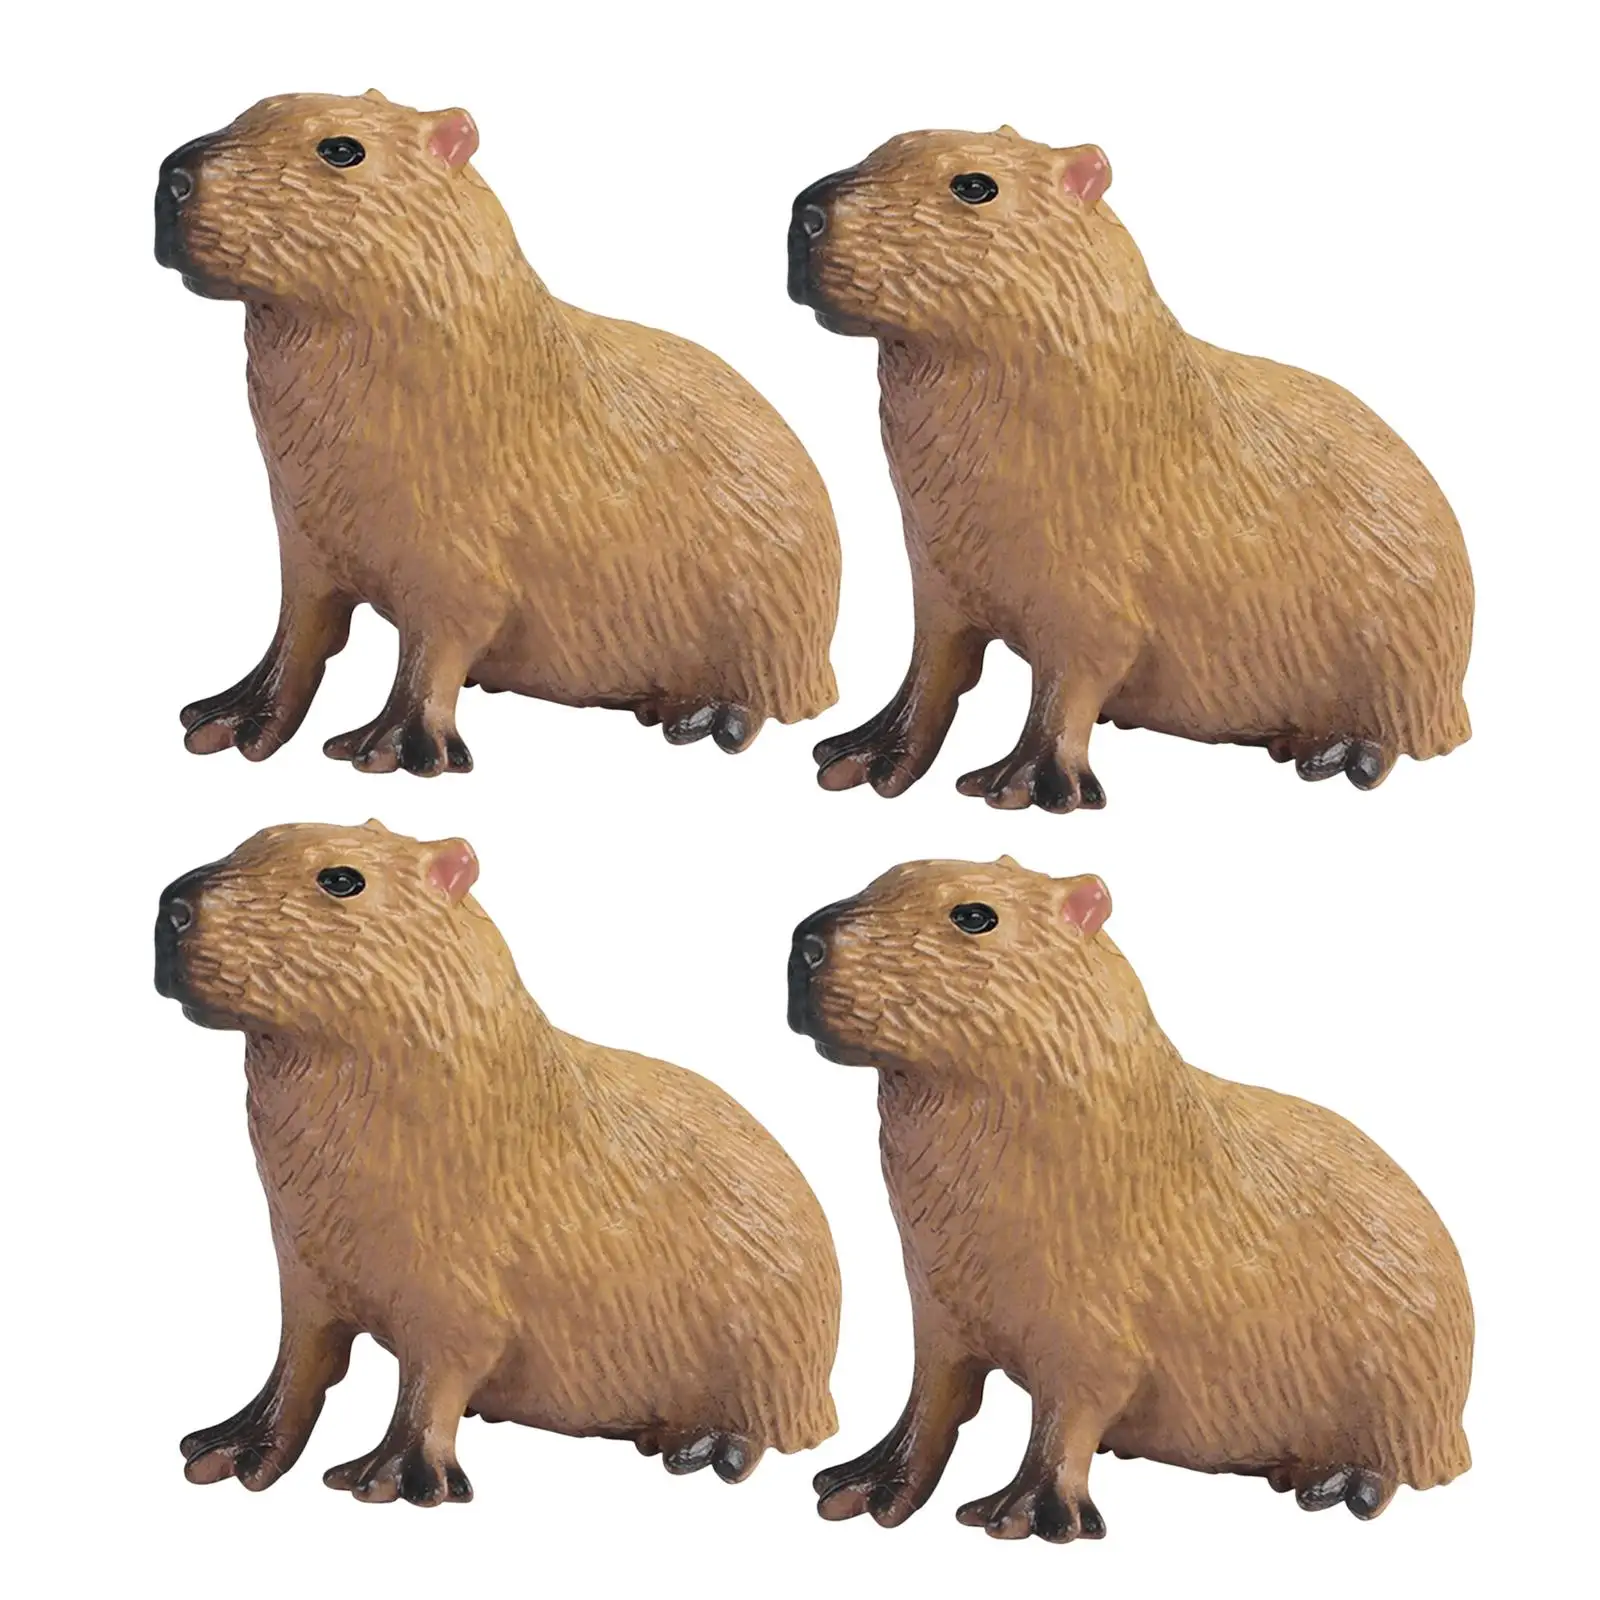 4x Capybara Figurines Toys Animals Model Playset for Home Ornaments Decor